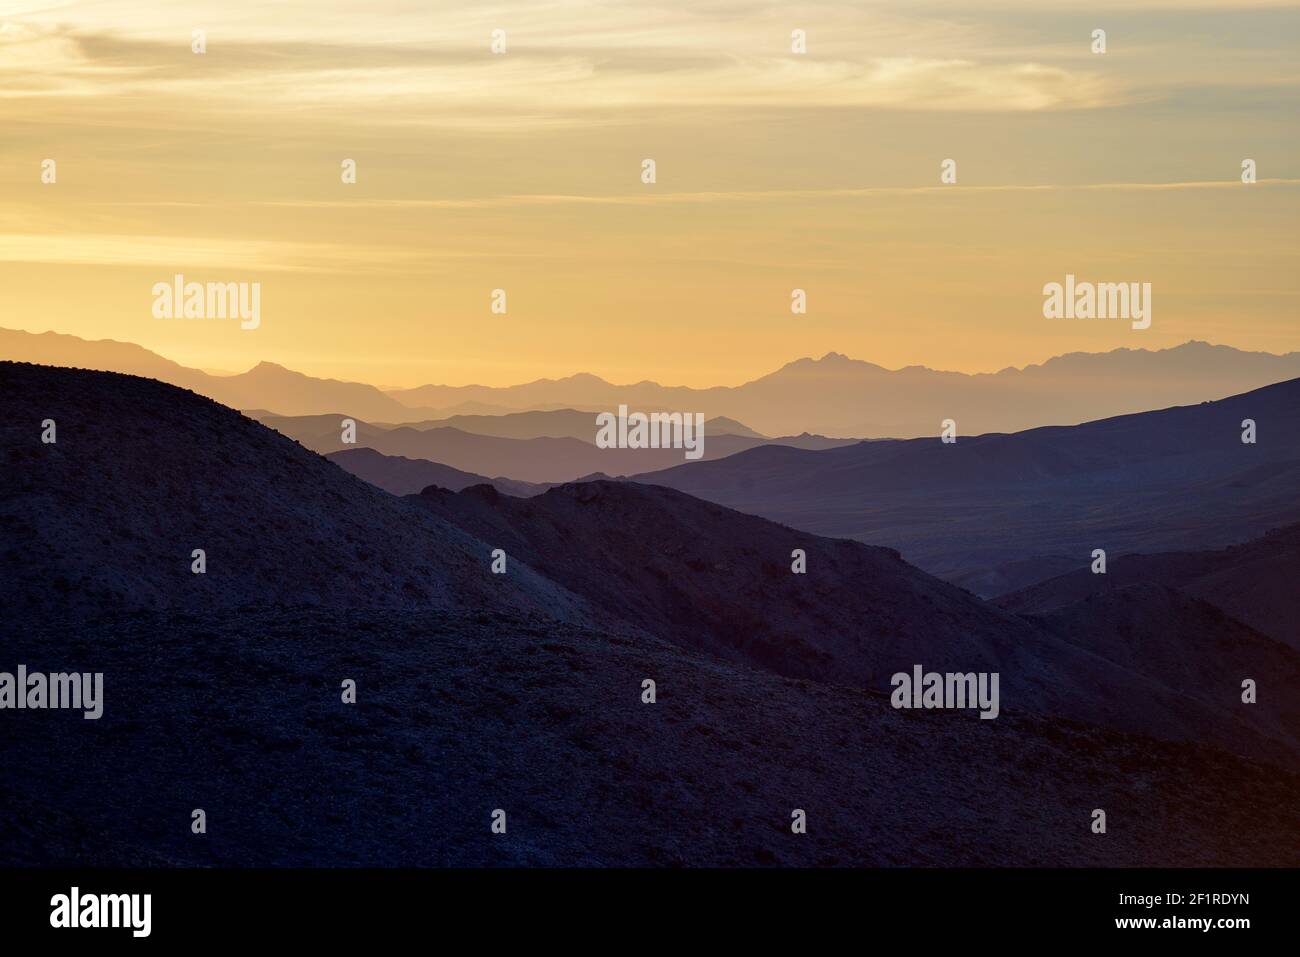 Sunrise in the mountains, Dante's View, Death Valley, California Stock Photo